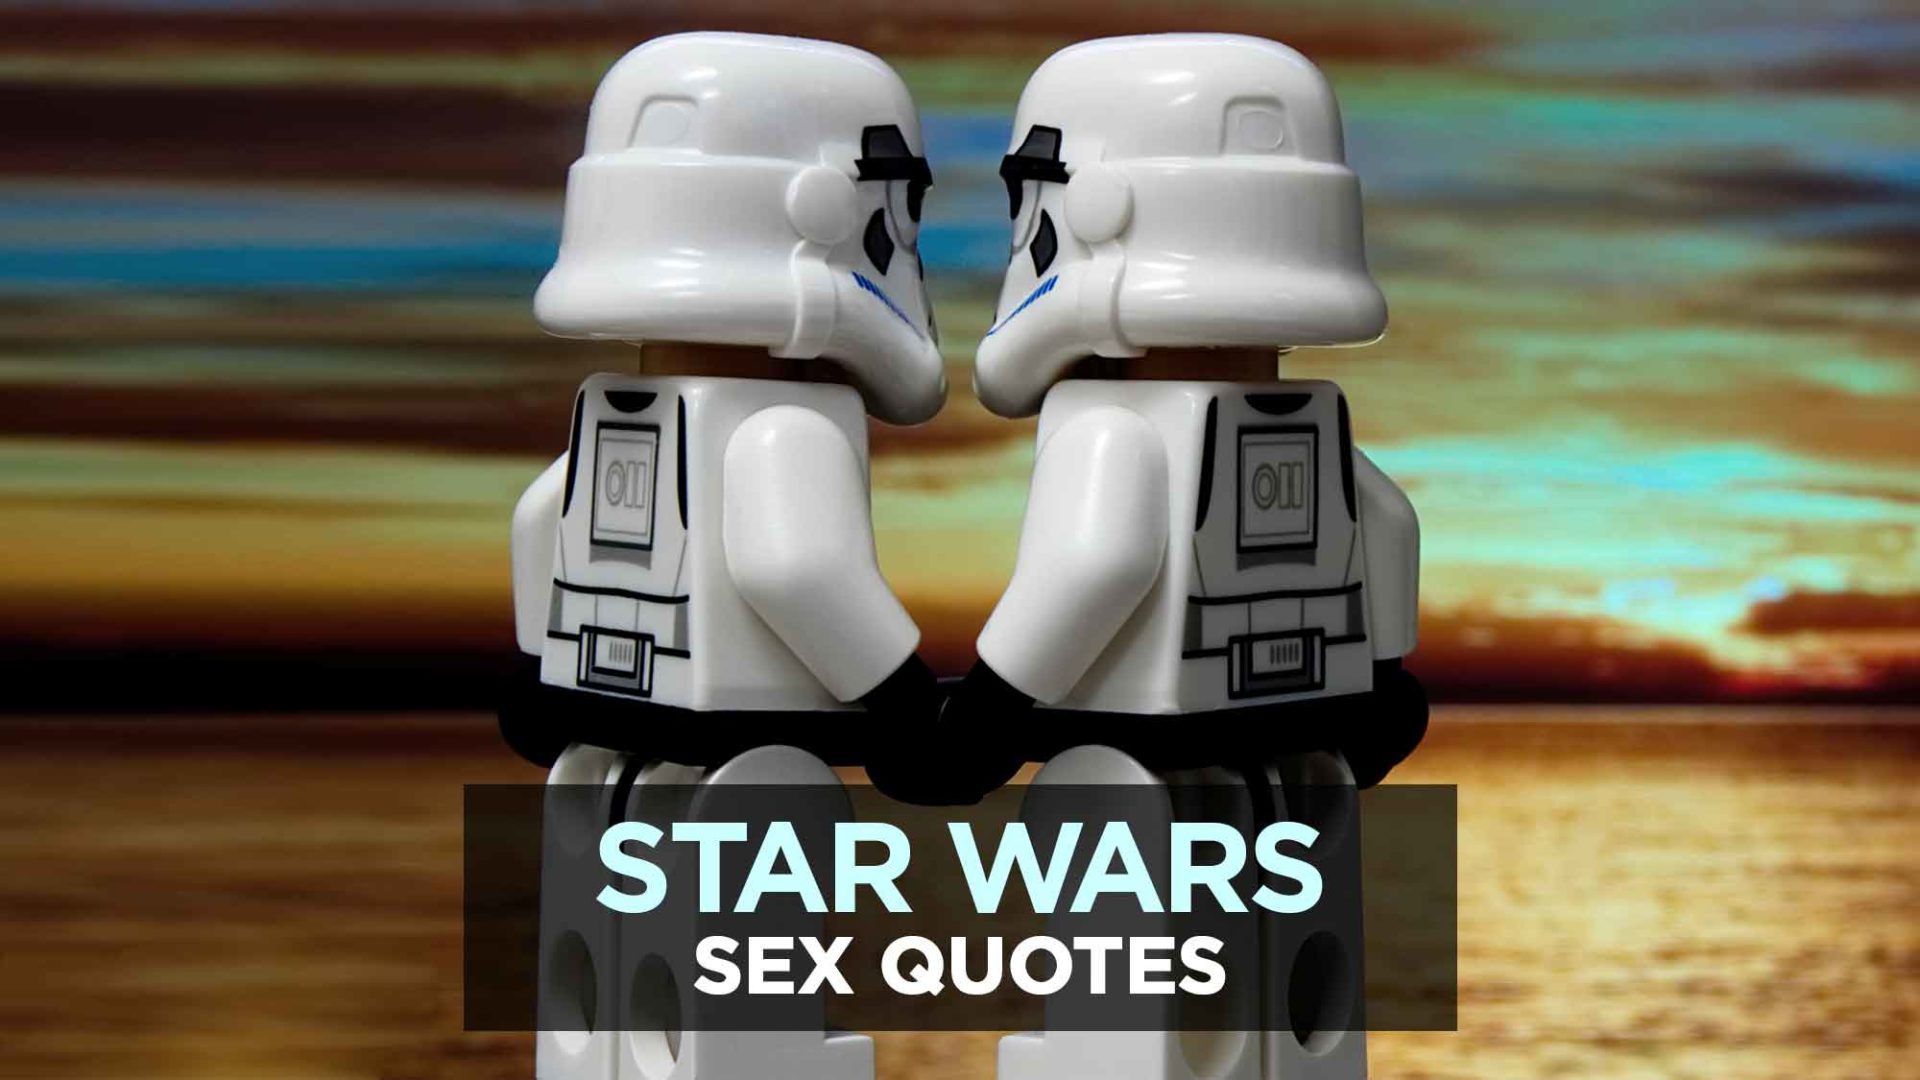 32 Funny Star Wars Sex Quotes From The Original Movie Trilogy